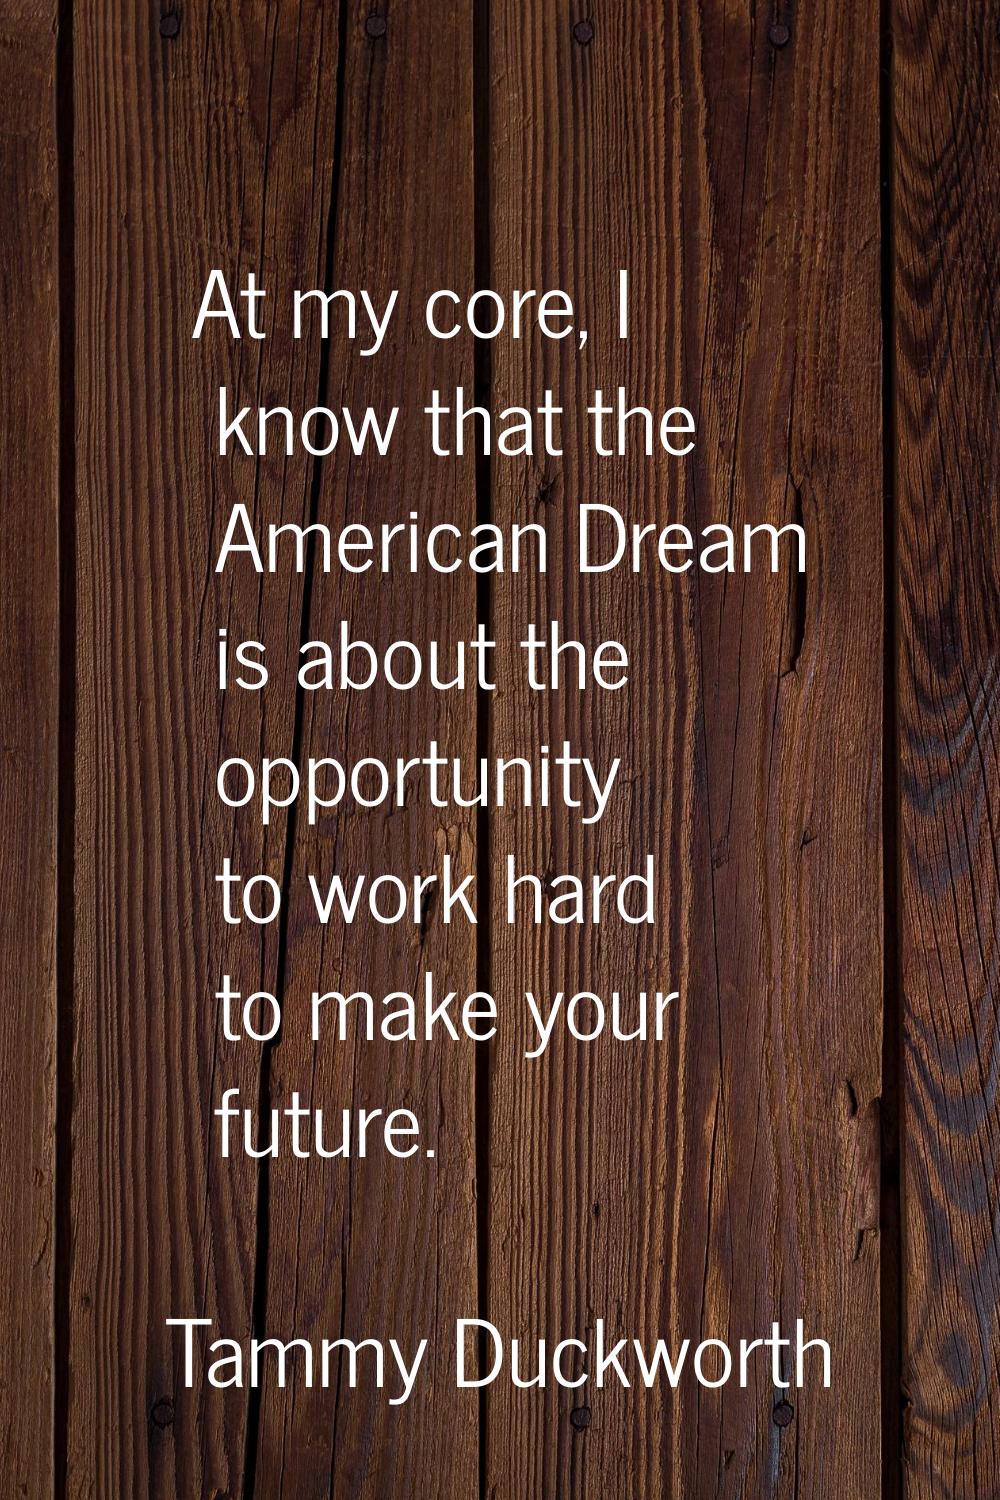 At my core, I know that the American Dream is about the opportunity to work hard to make your futur